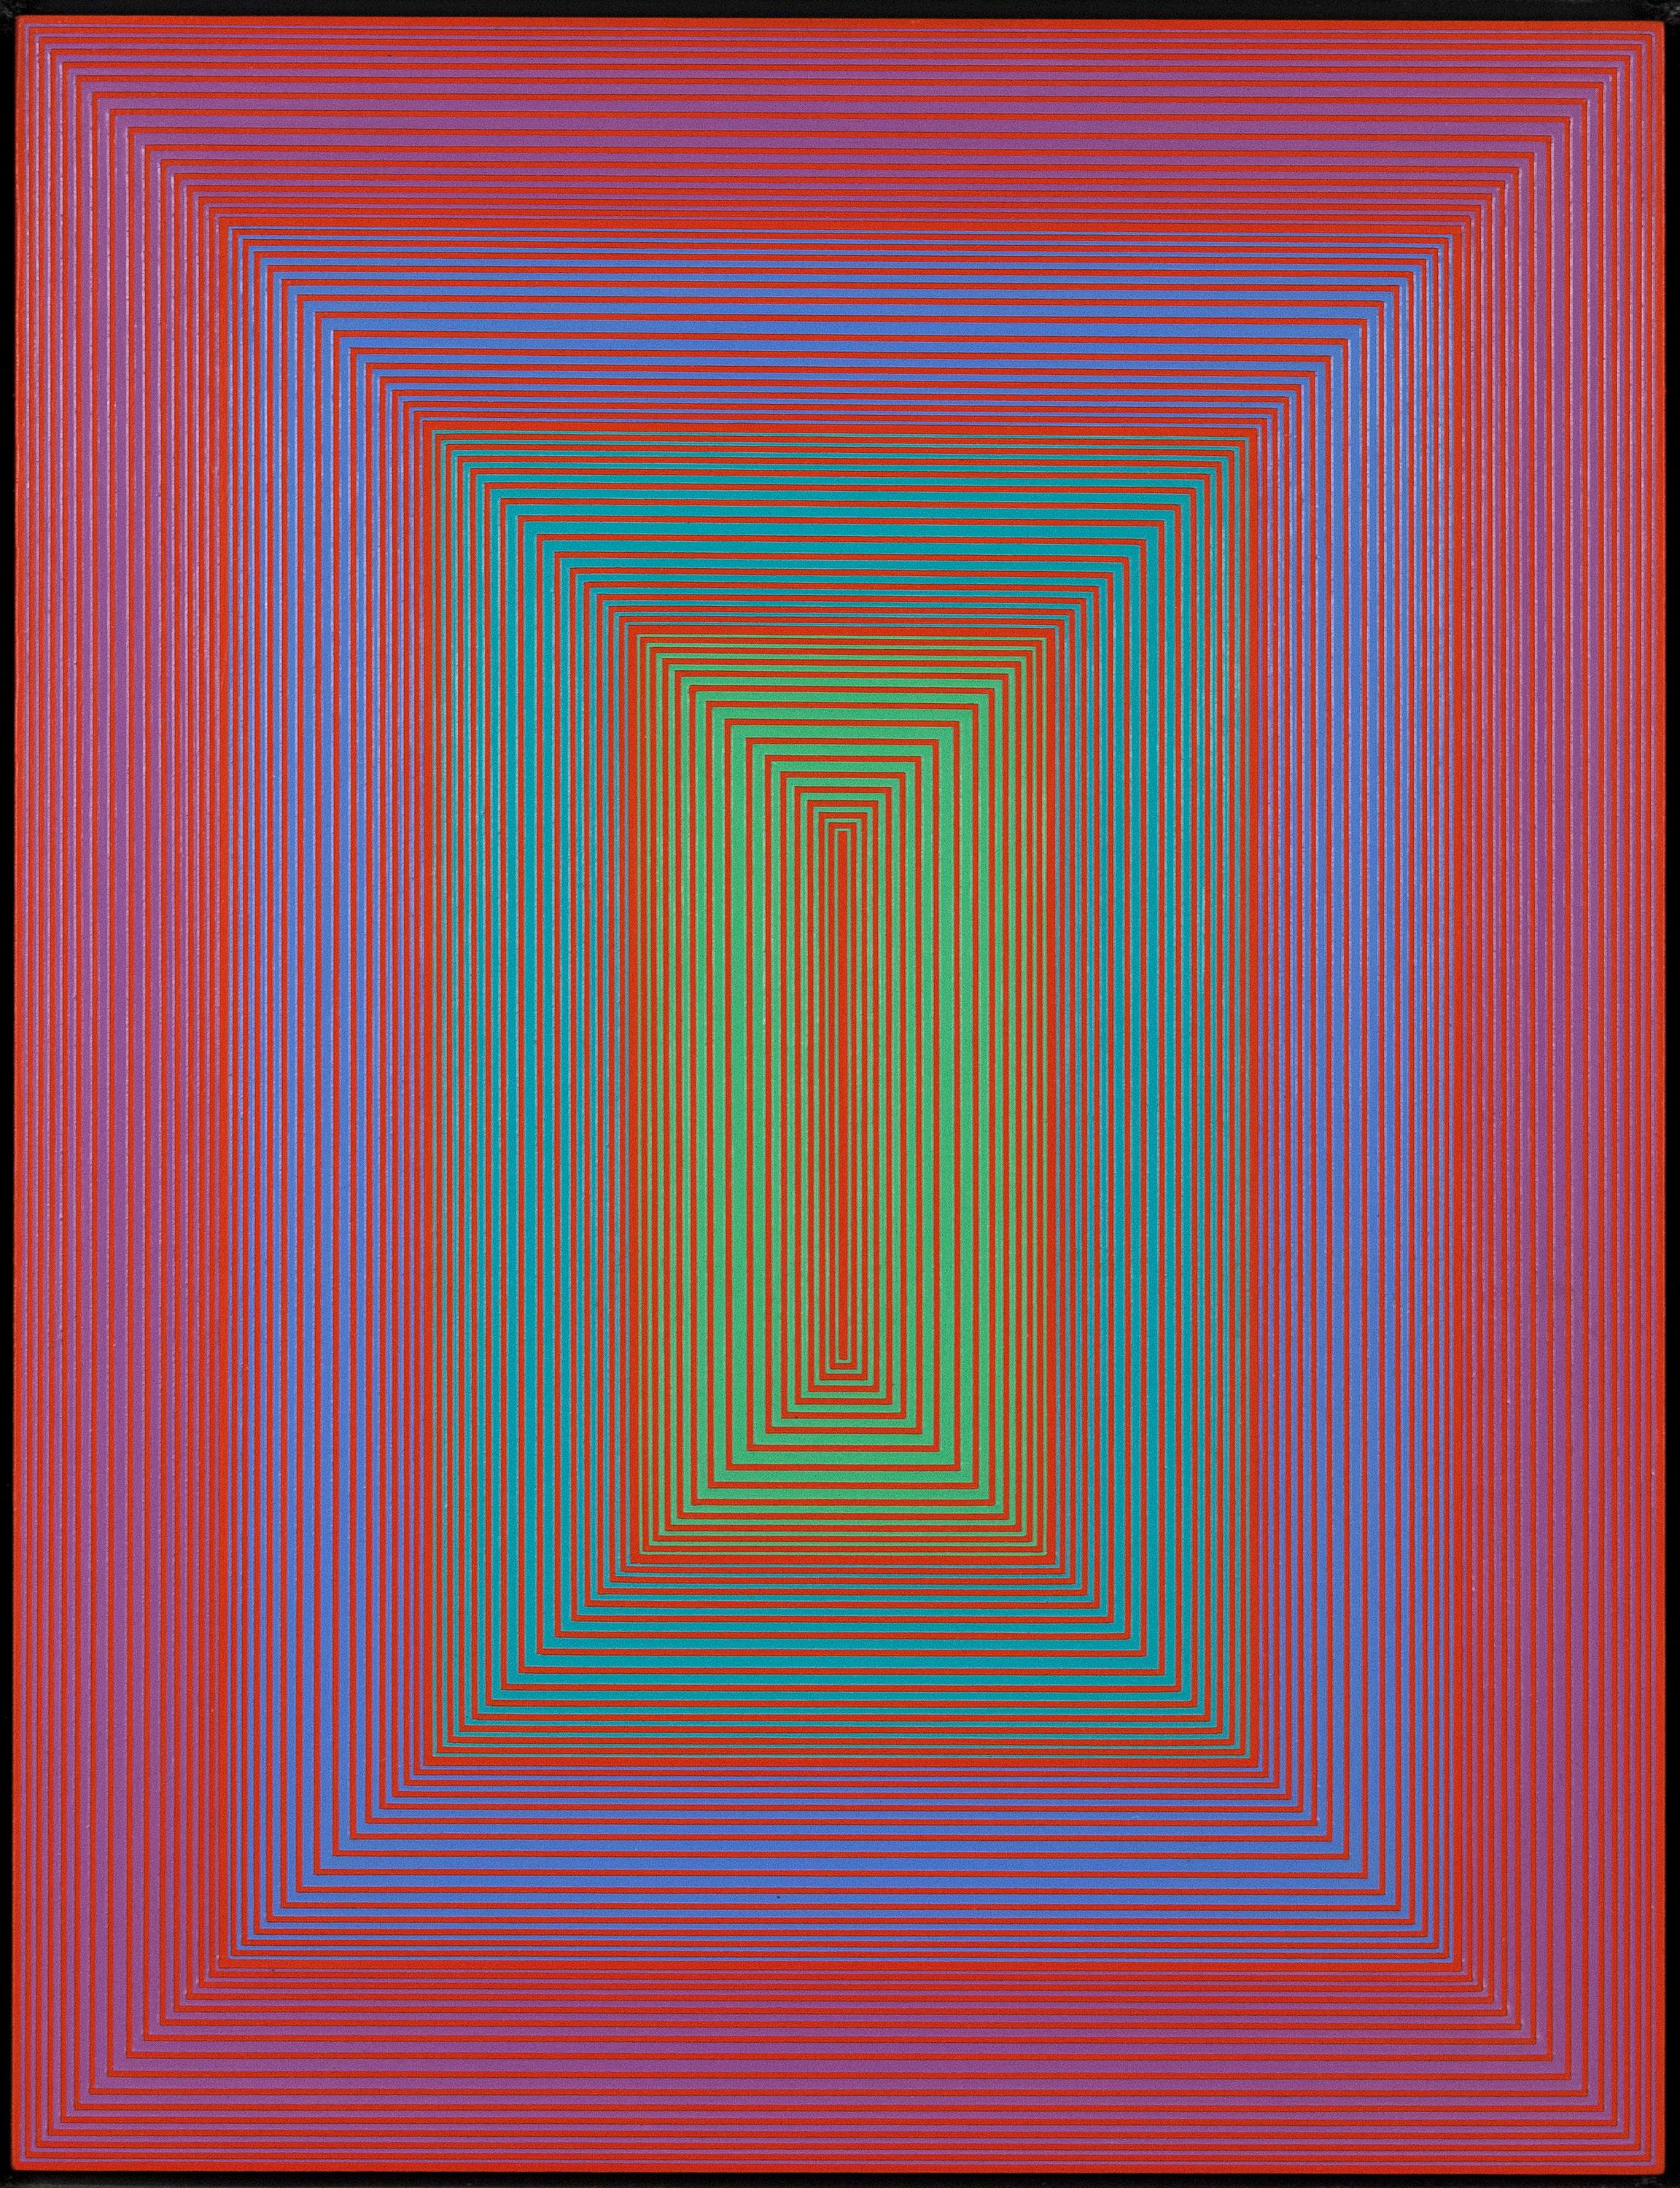 One of our favorite American artists, Richard Anuszkiewicz (b. 1930) is a major player in both Op Art and Hard-Edge Abstraction. His work is typically composed of rich vibrant colors in strict geometries. 

As the artist explained “I’m interested in